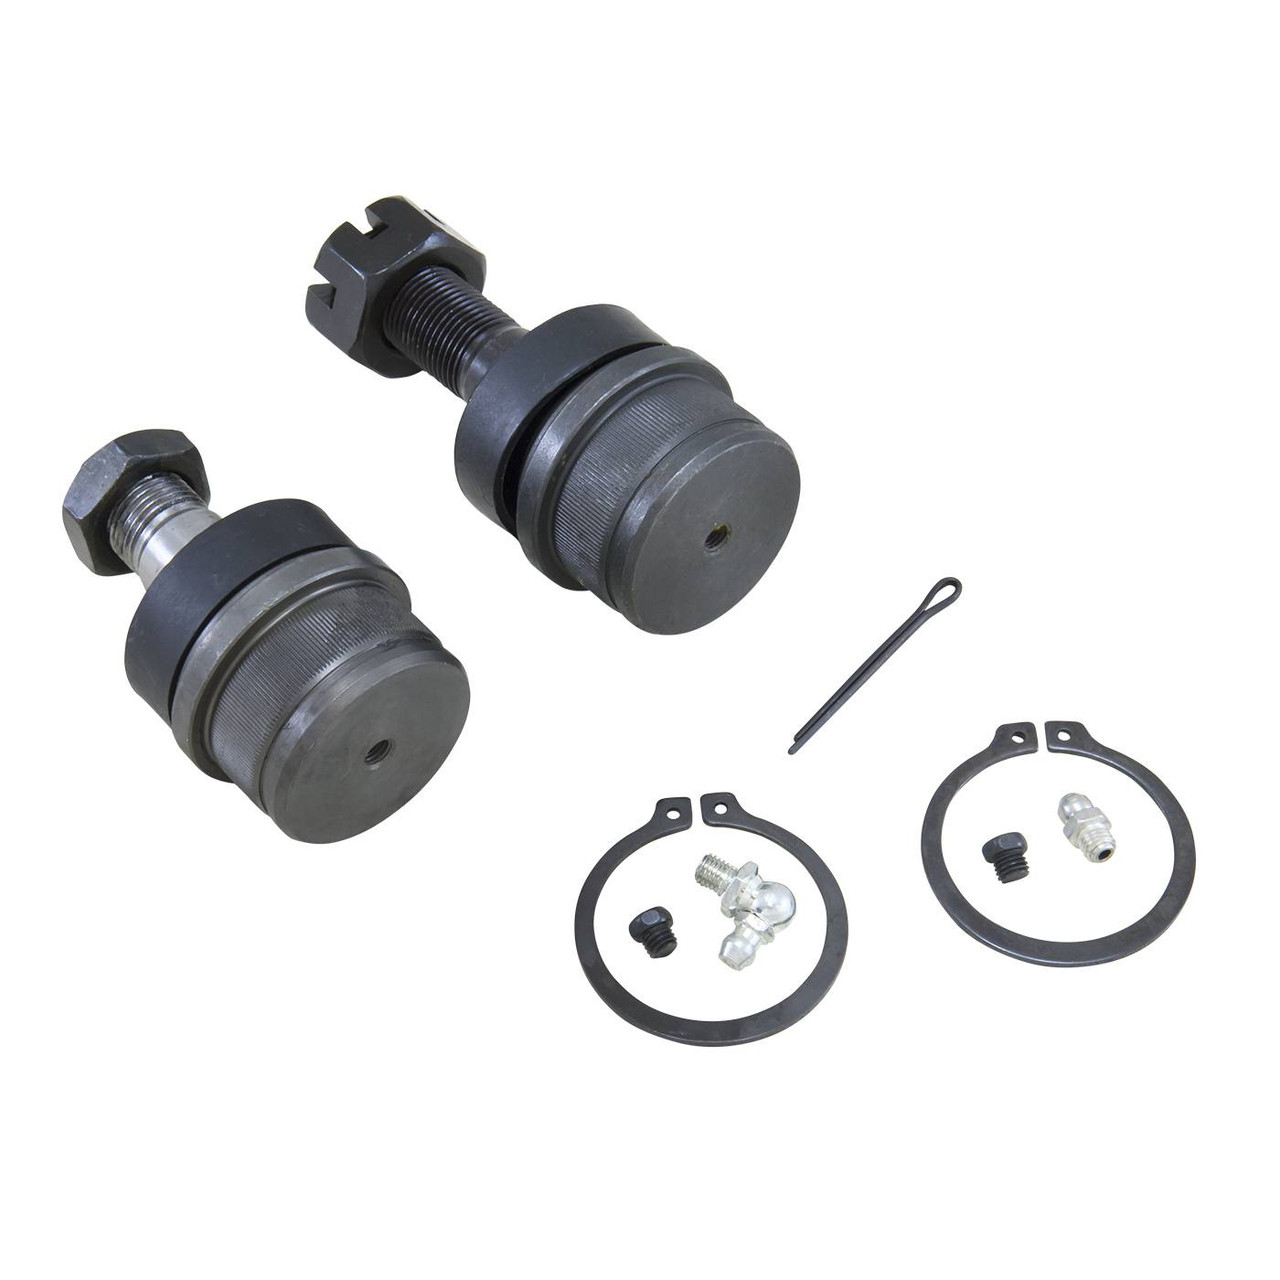 Yukon Gear Ball Joint Kit For 80-96 Bronco & F150 / One Side - YSPBJ-009